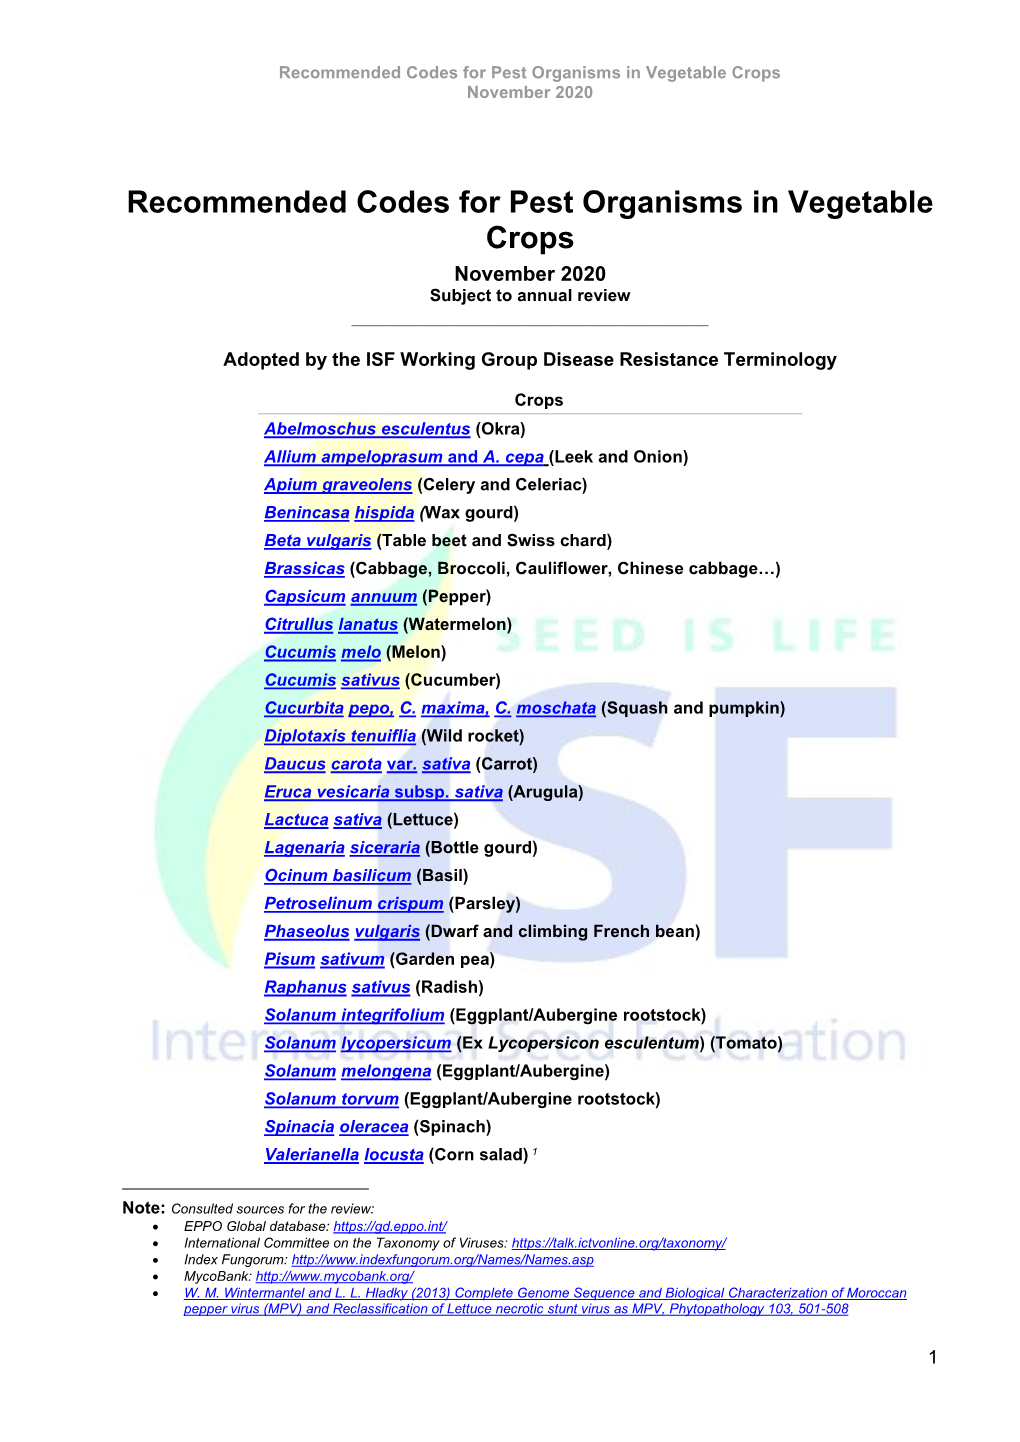 Recommended Codes for Pest Organisms in Vegetable Crops November 2020